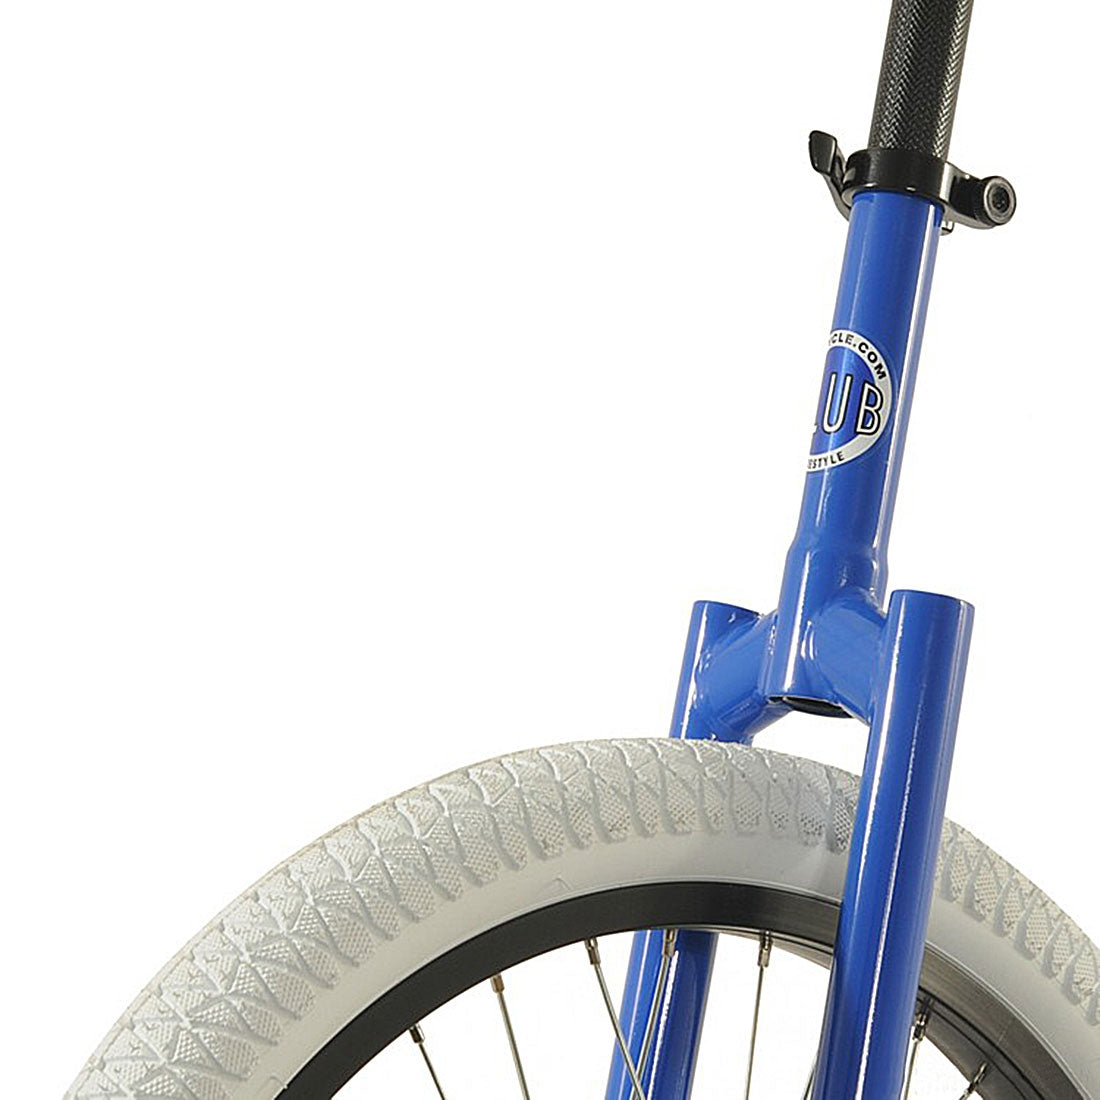 Club Freestyle 20inch Unicycle - Blue/White Other Fun Toys